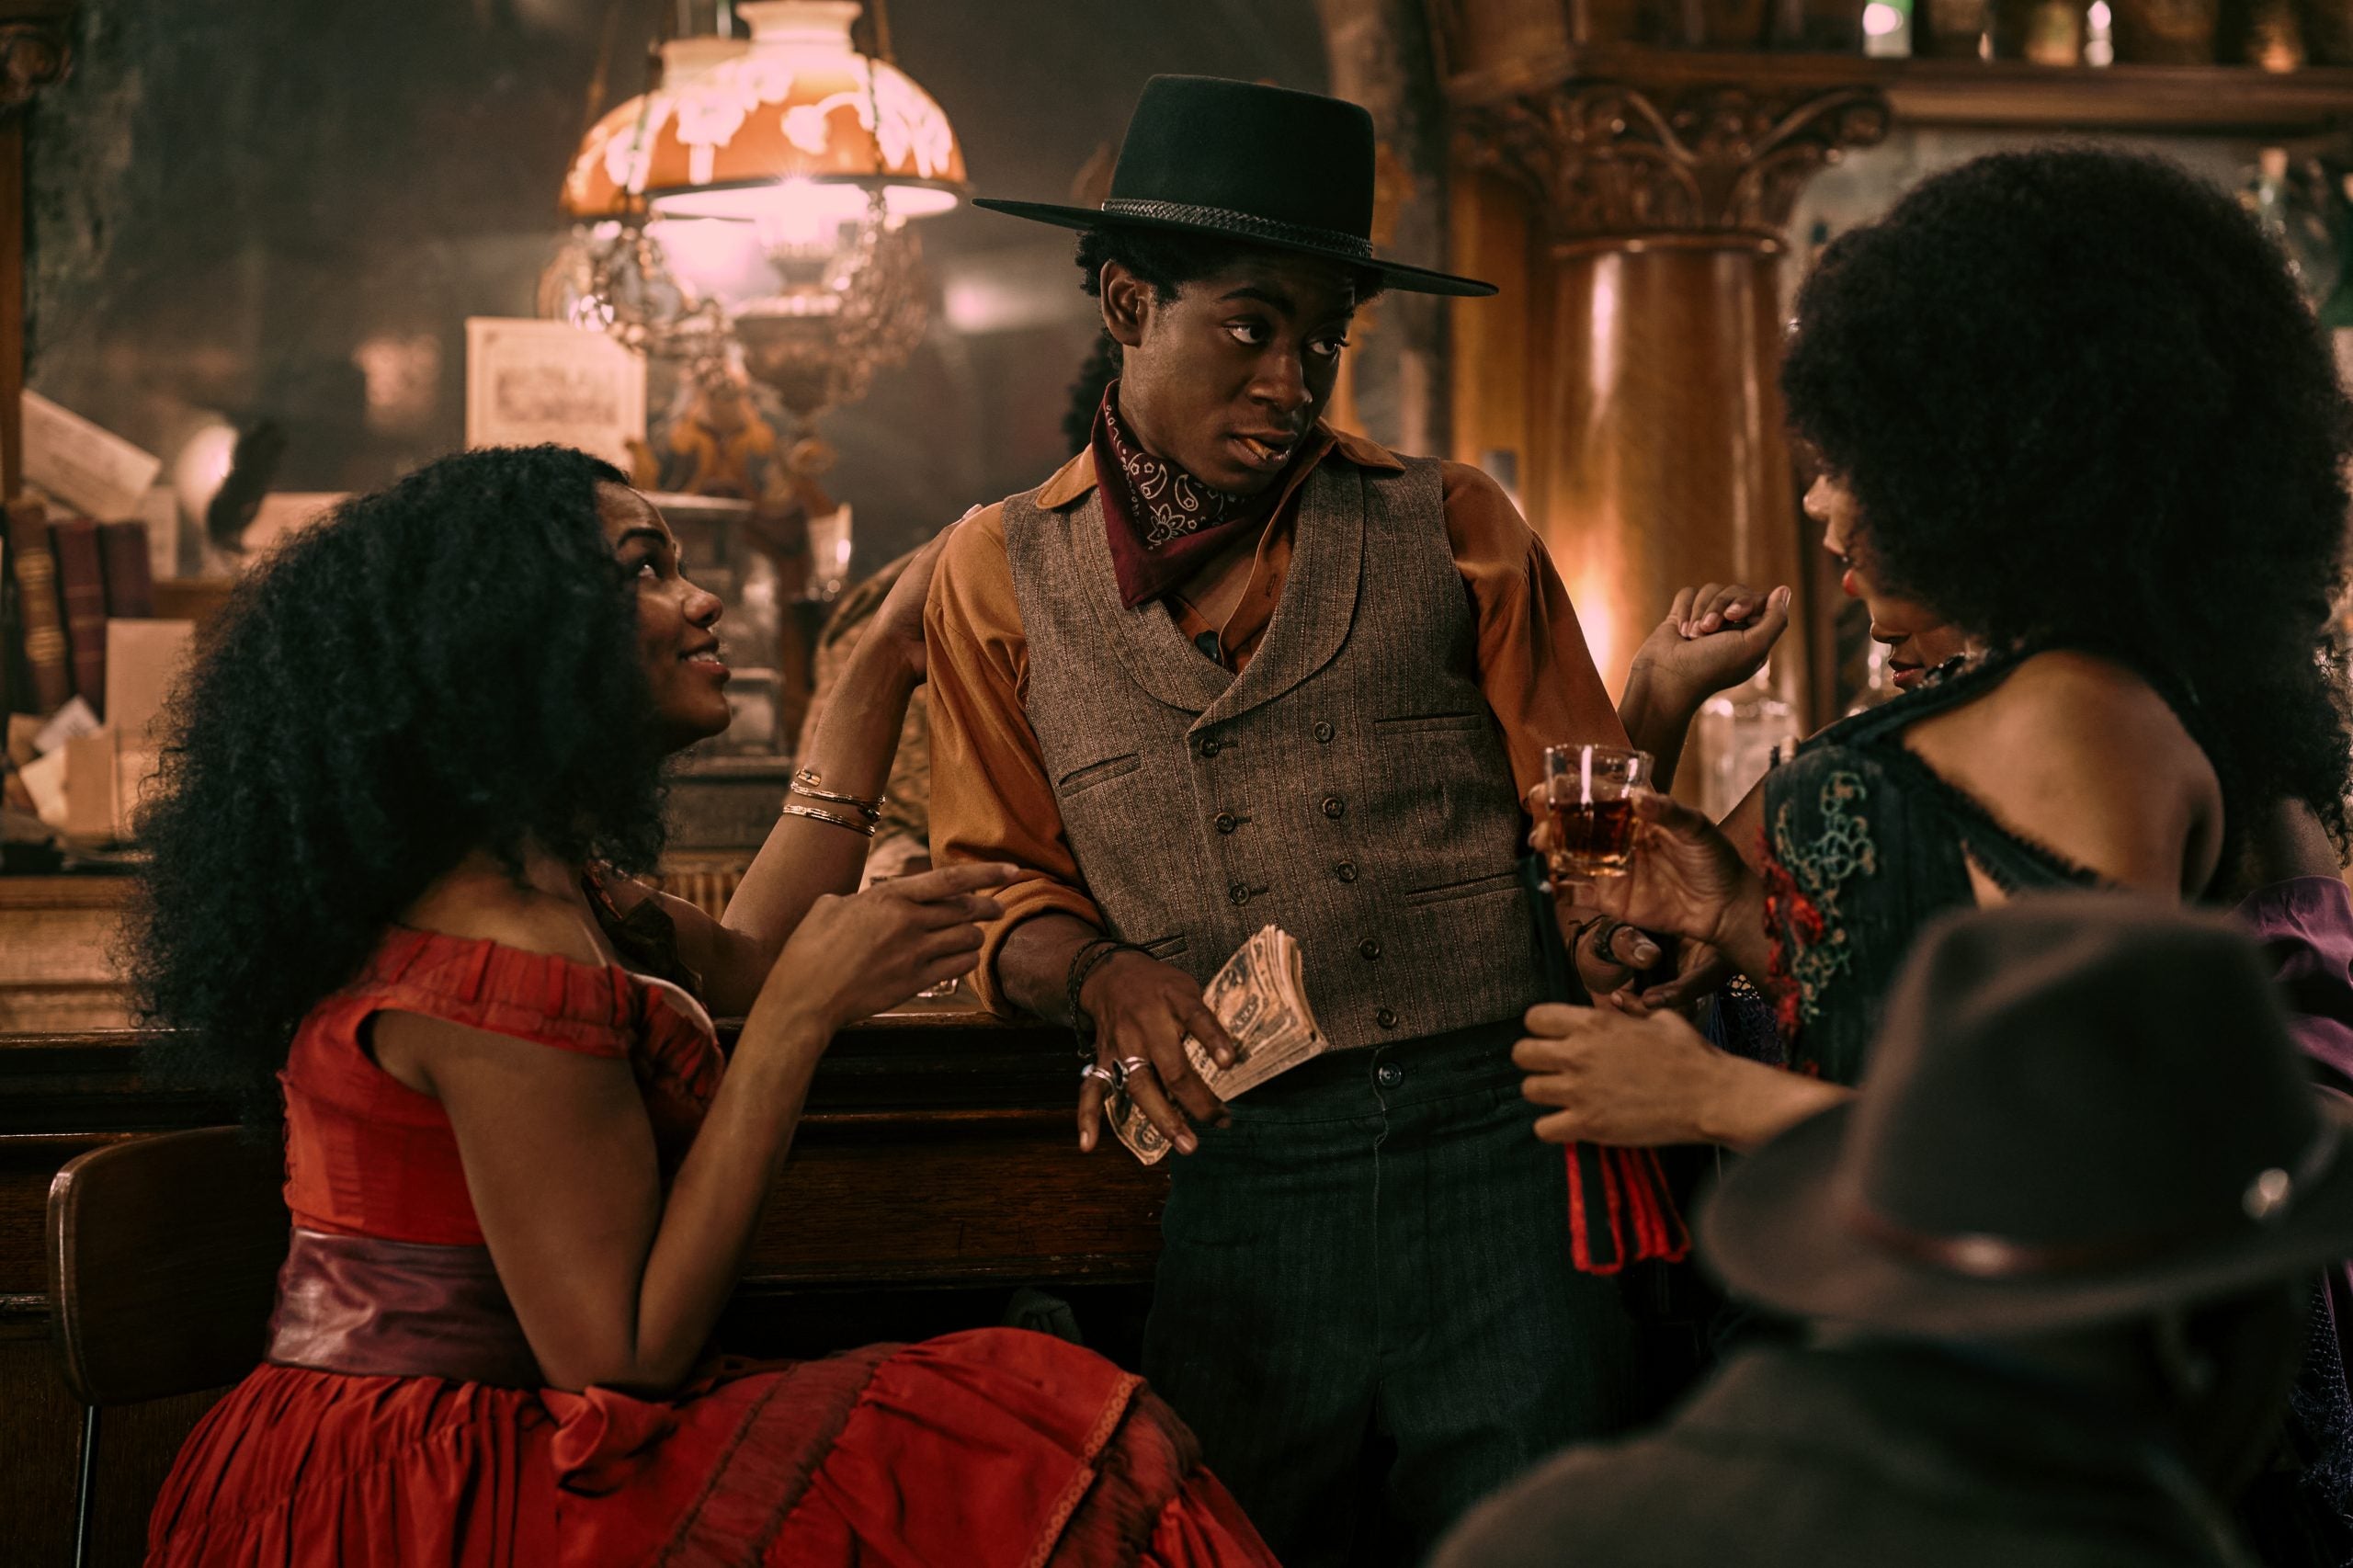 Meet The Real-Life Figures Depicted In The Black Western ‘The Harder They Fall’